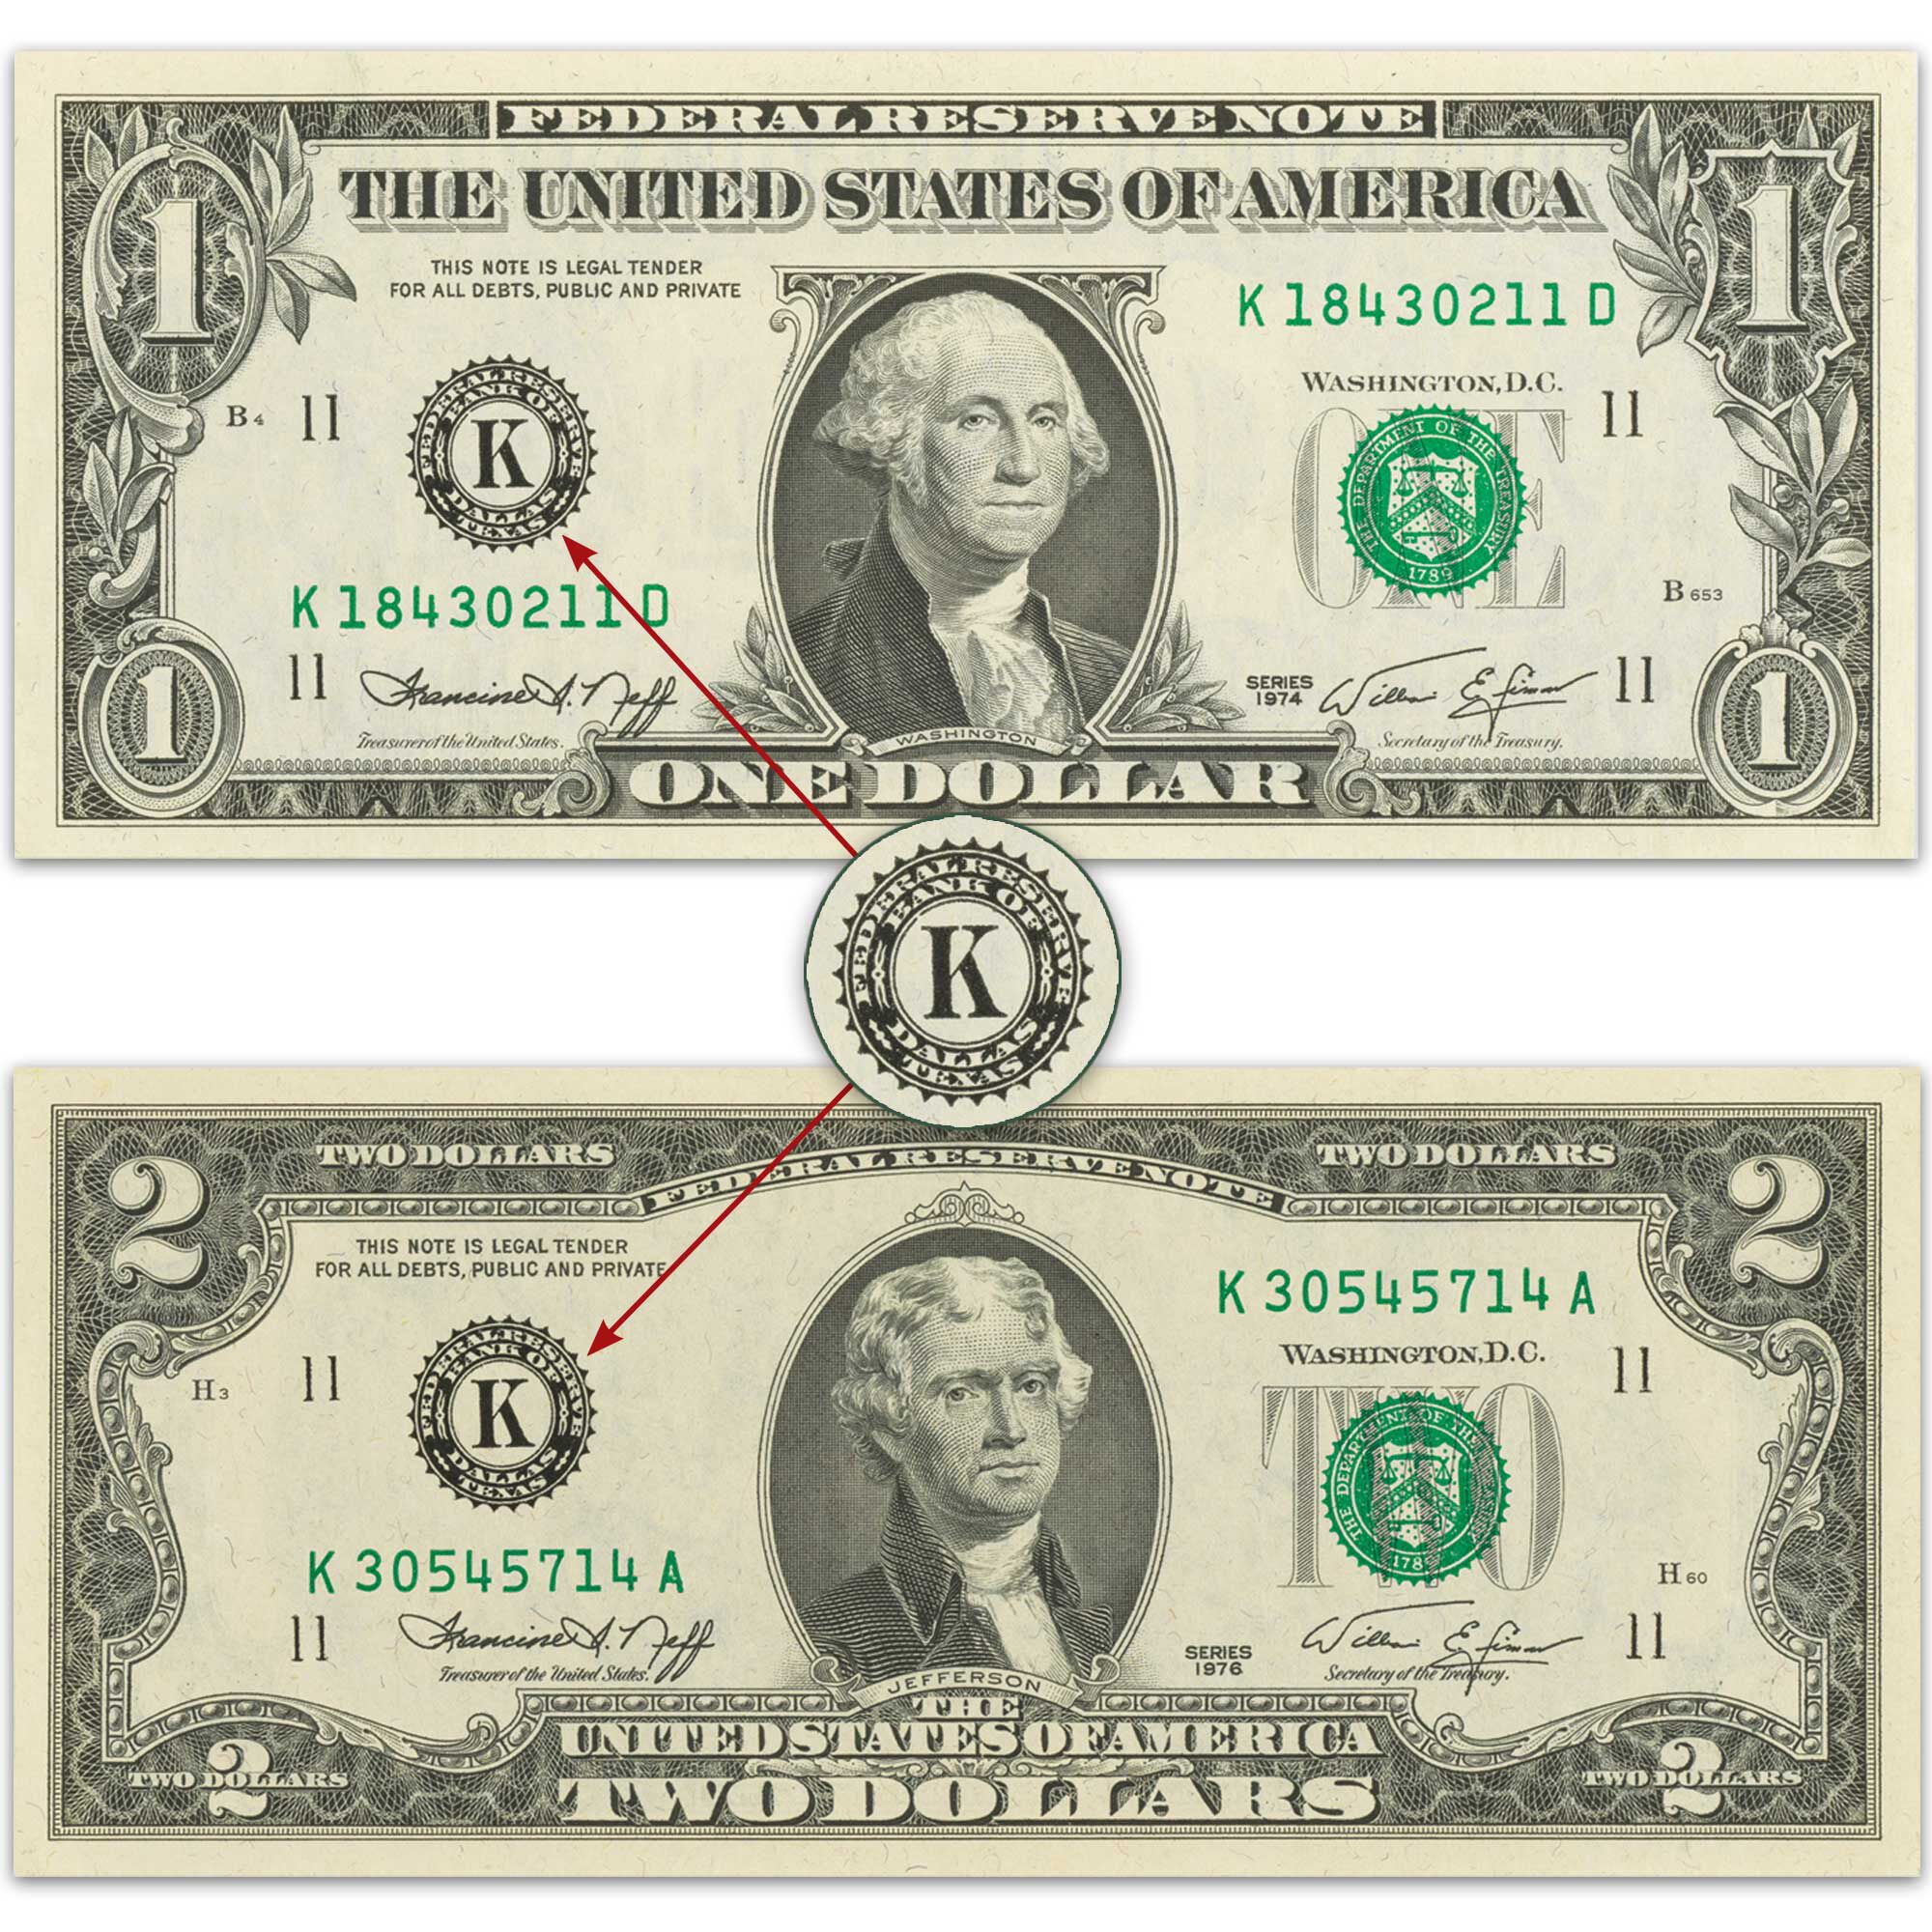 The Complete Federal Reserve Bank U.S. Currency Collection